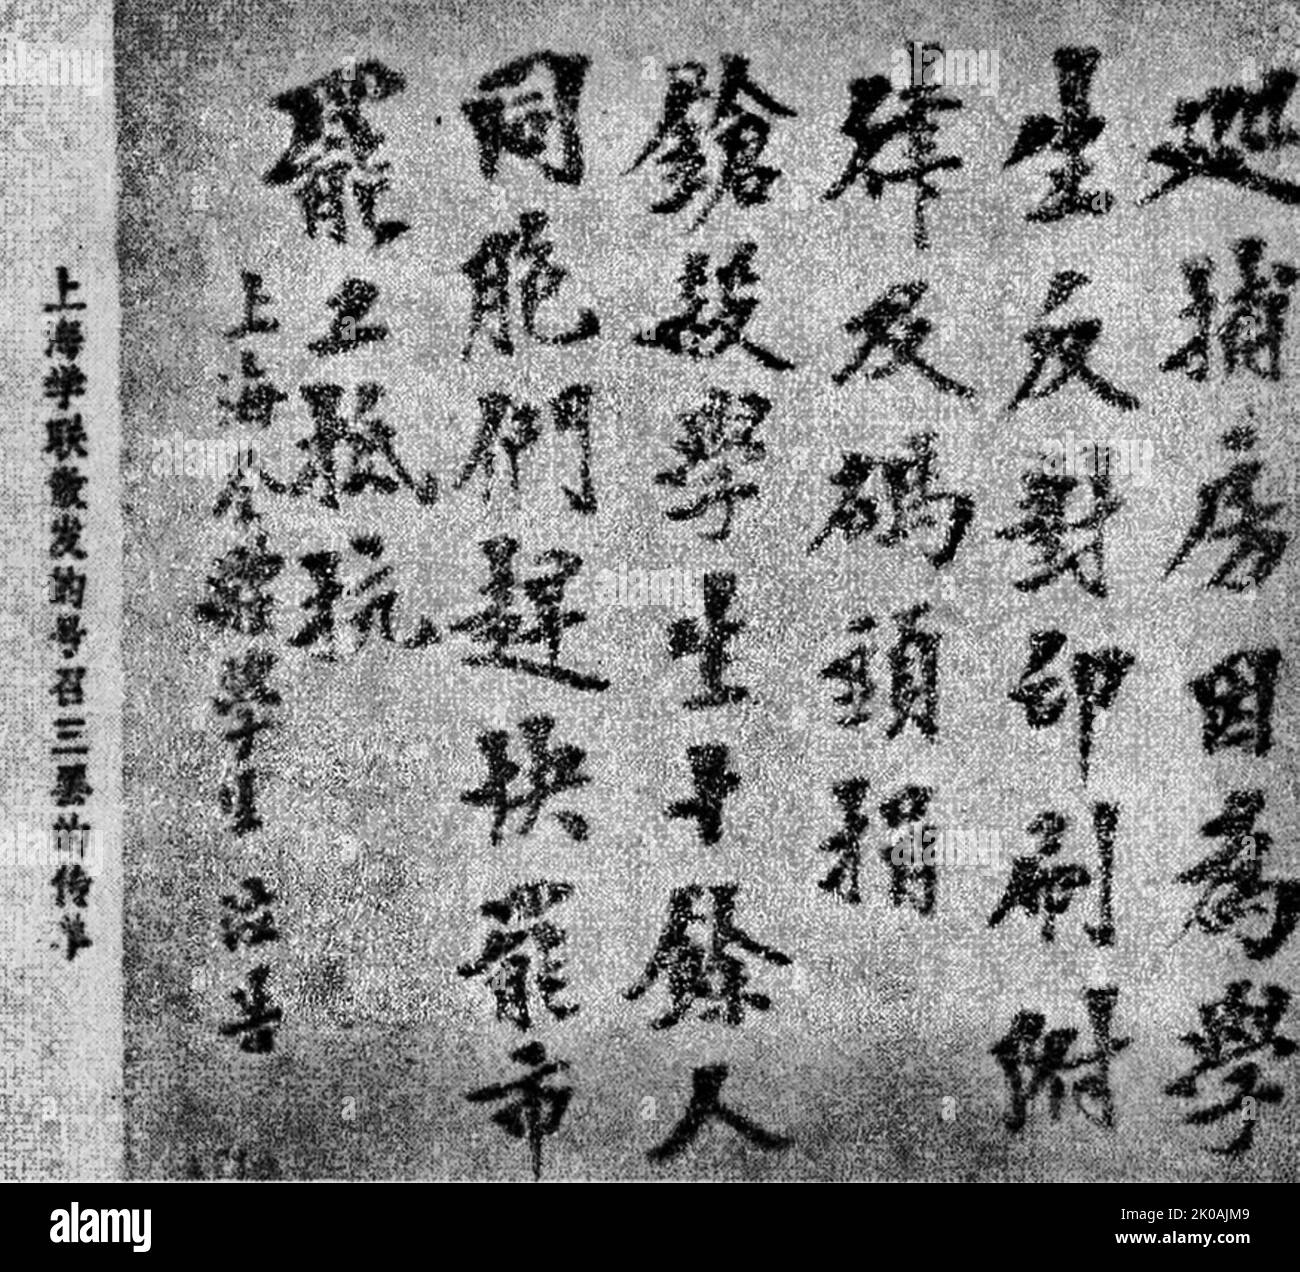 Leaflets distributed by Shanghai Student Union, calling for 'Three Strikes'. 'Three Strikes' included work strike, class strike, and market strike, it was a part of the May Fourth Movement, a Chinese anti-imperialist, cultural, and political movement that grew out of student protests in Beijing on May 4, 1919. Stock Photo